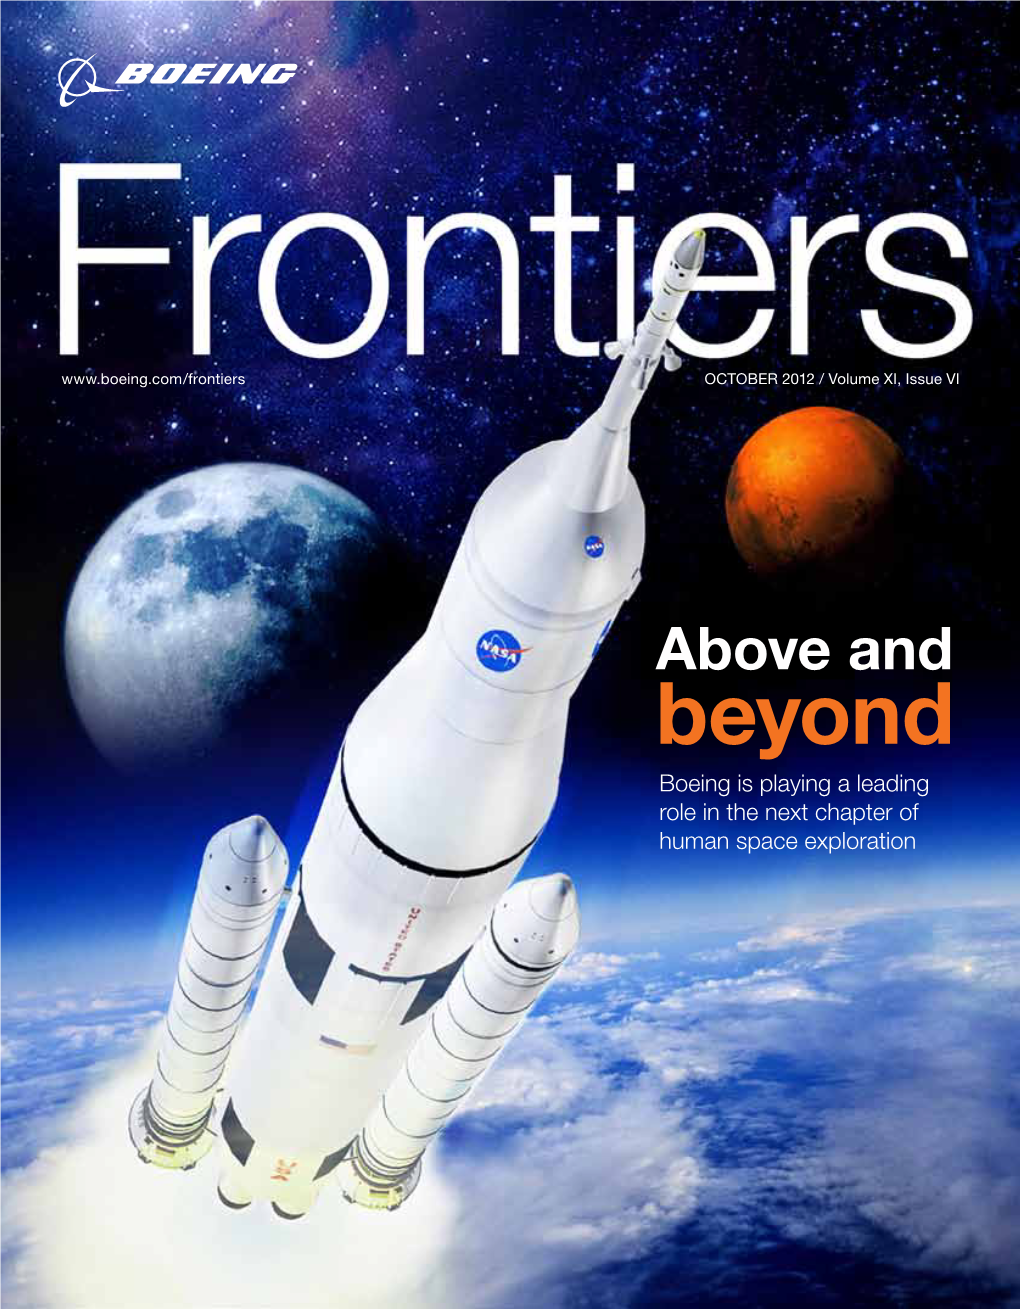 Beyond Boeing Is Playing a Leading Role in the Next Chapter of Human Space Exploration